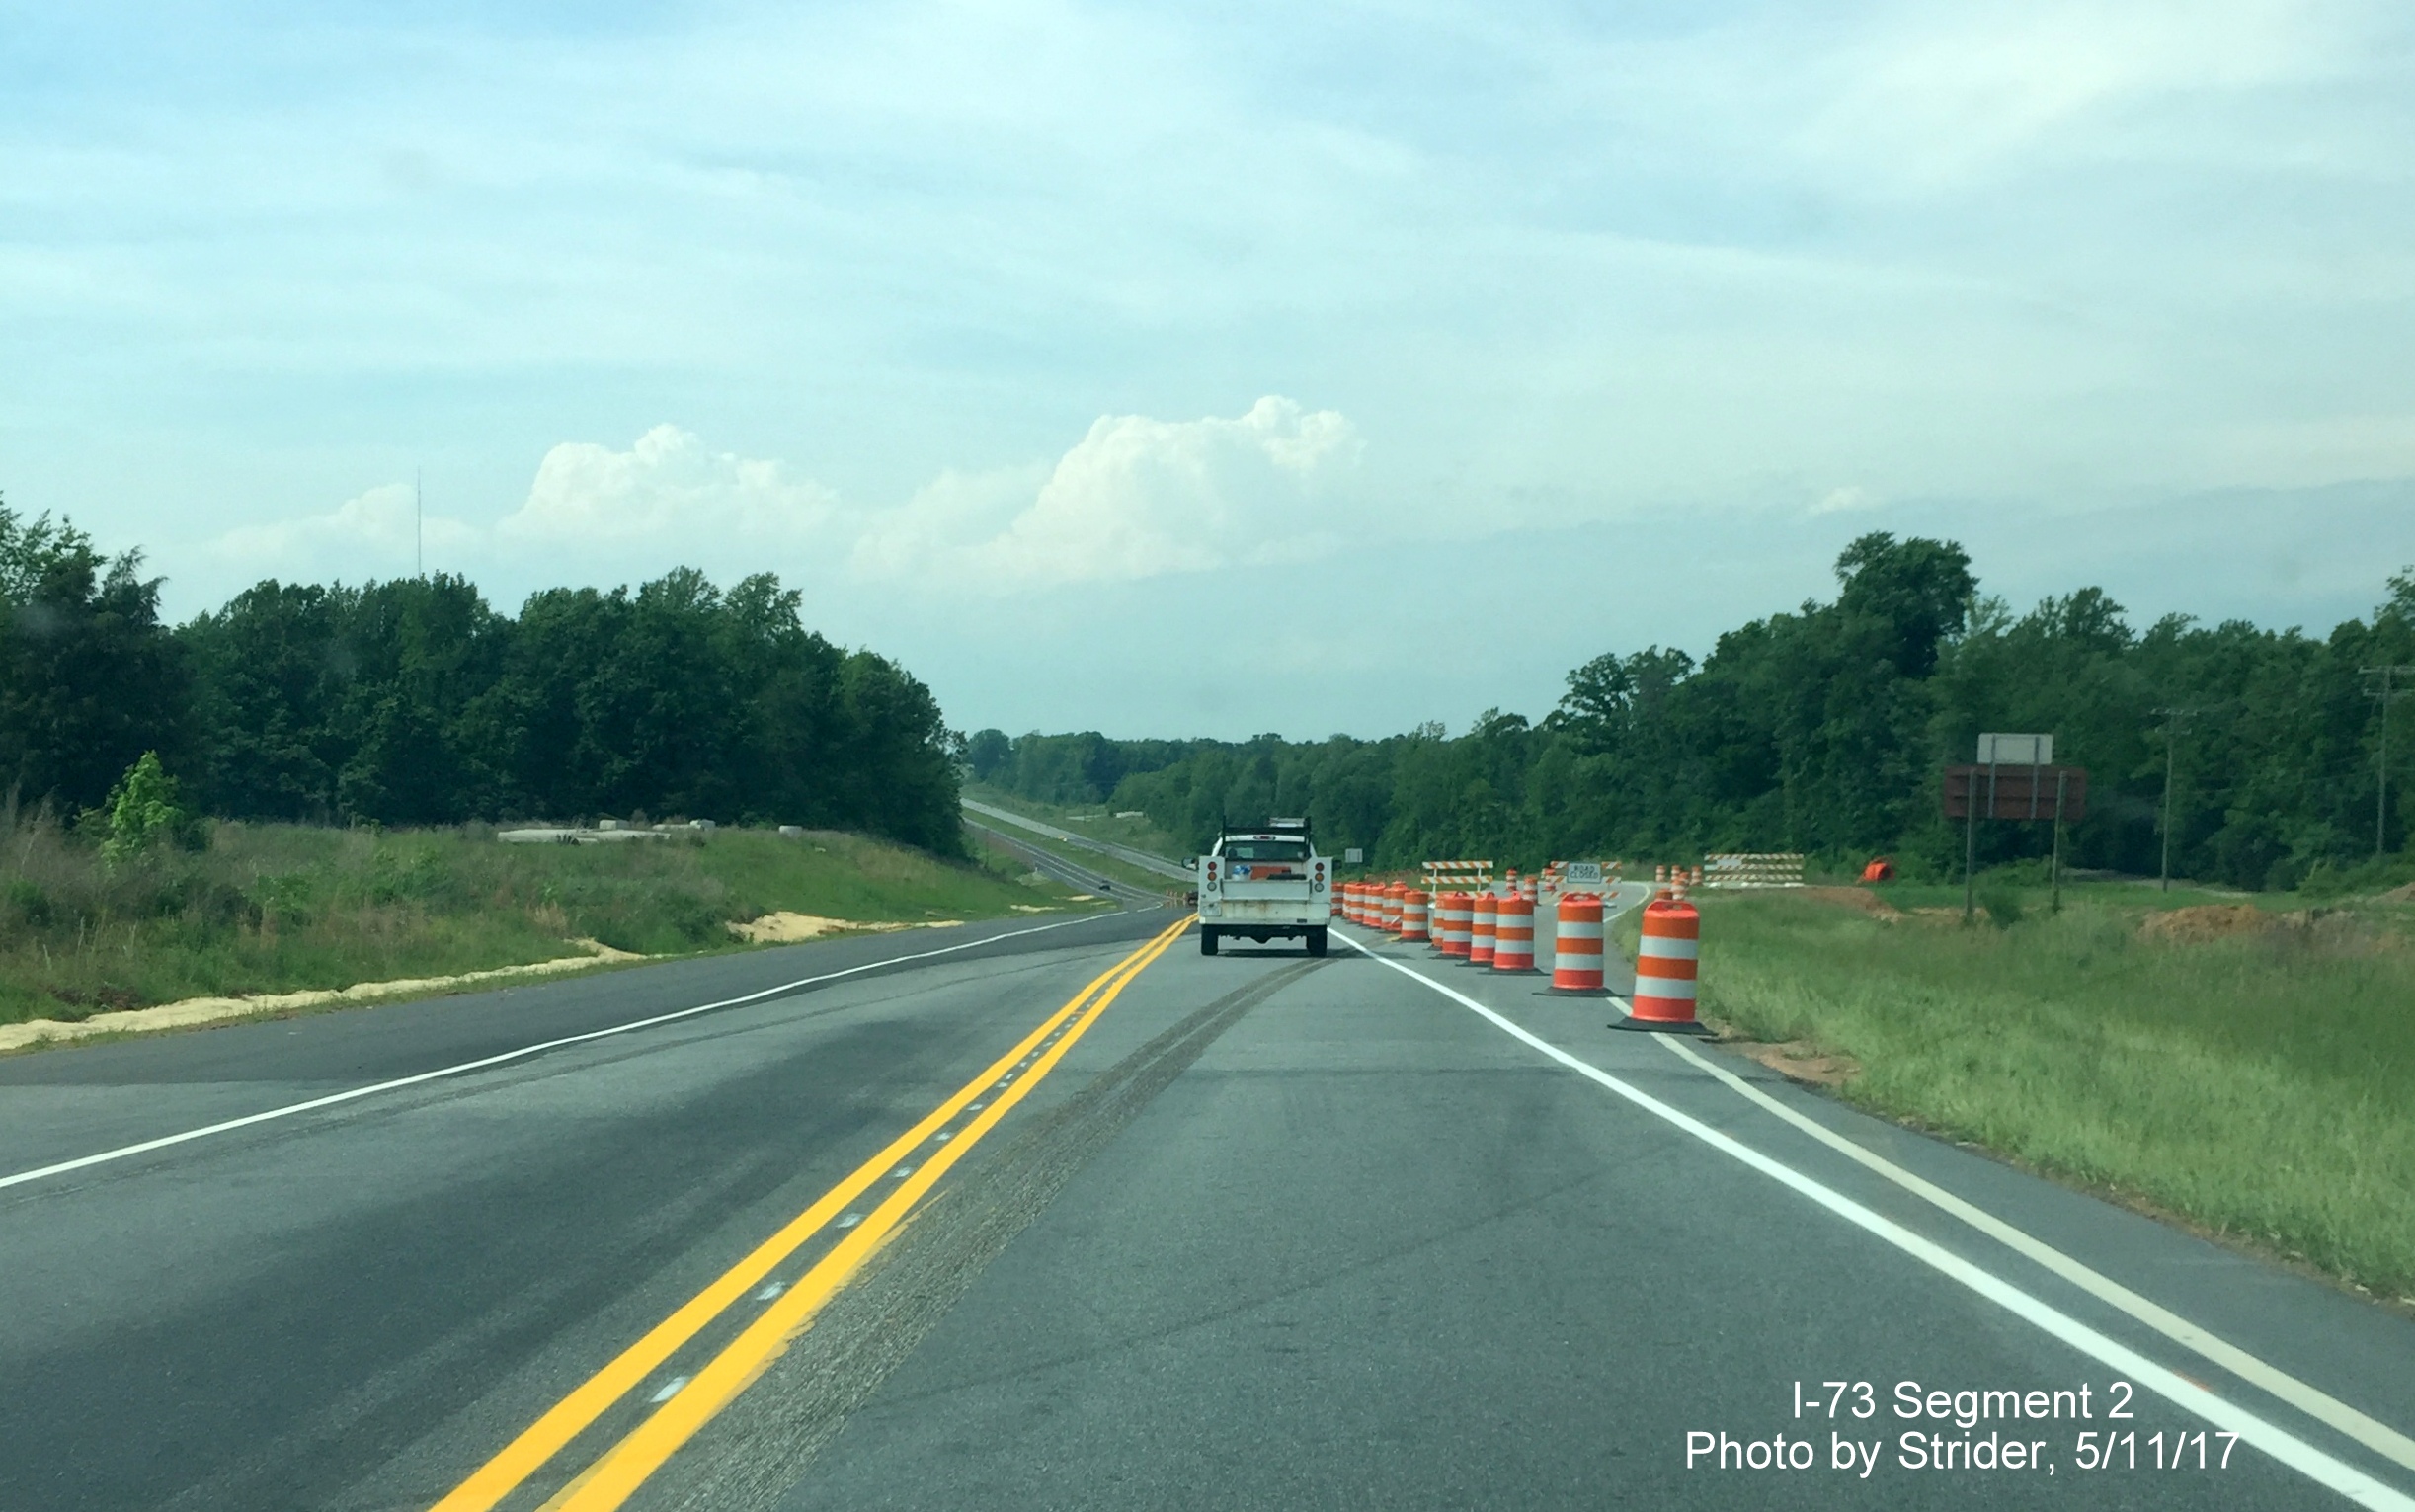 Image taken on US 220 North prior to former lane shift for traffic on Future I-73 South lanes in Guilford County, by Strider